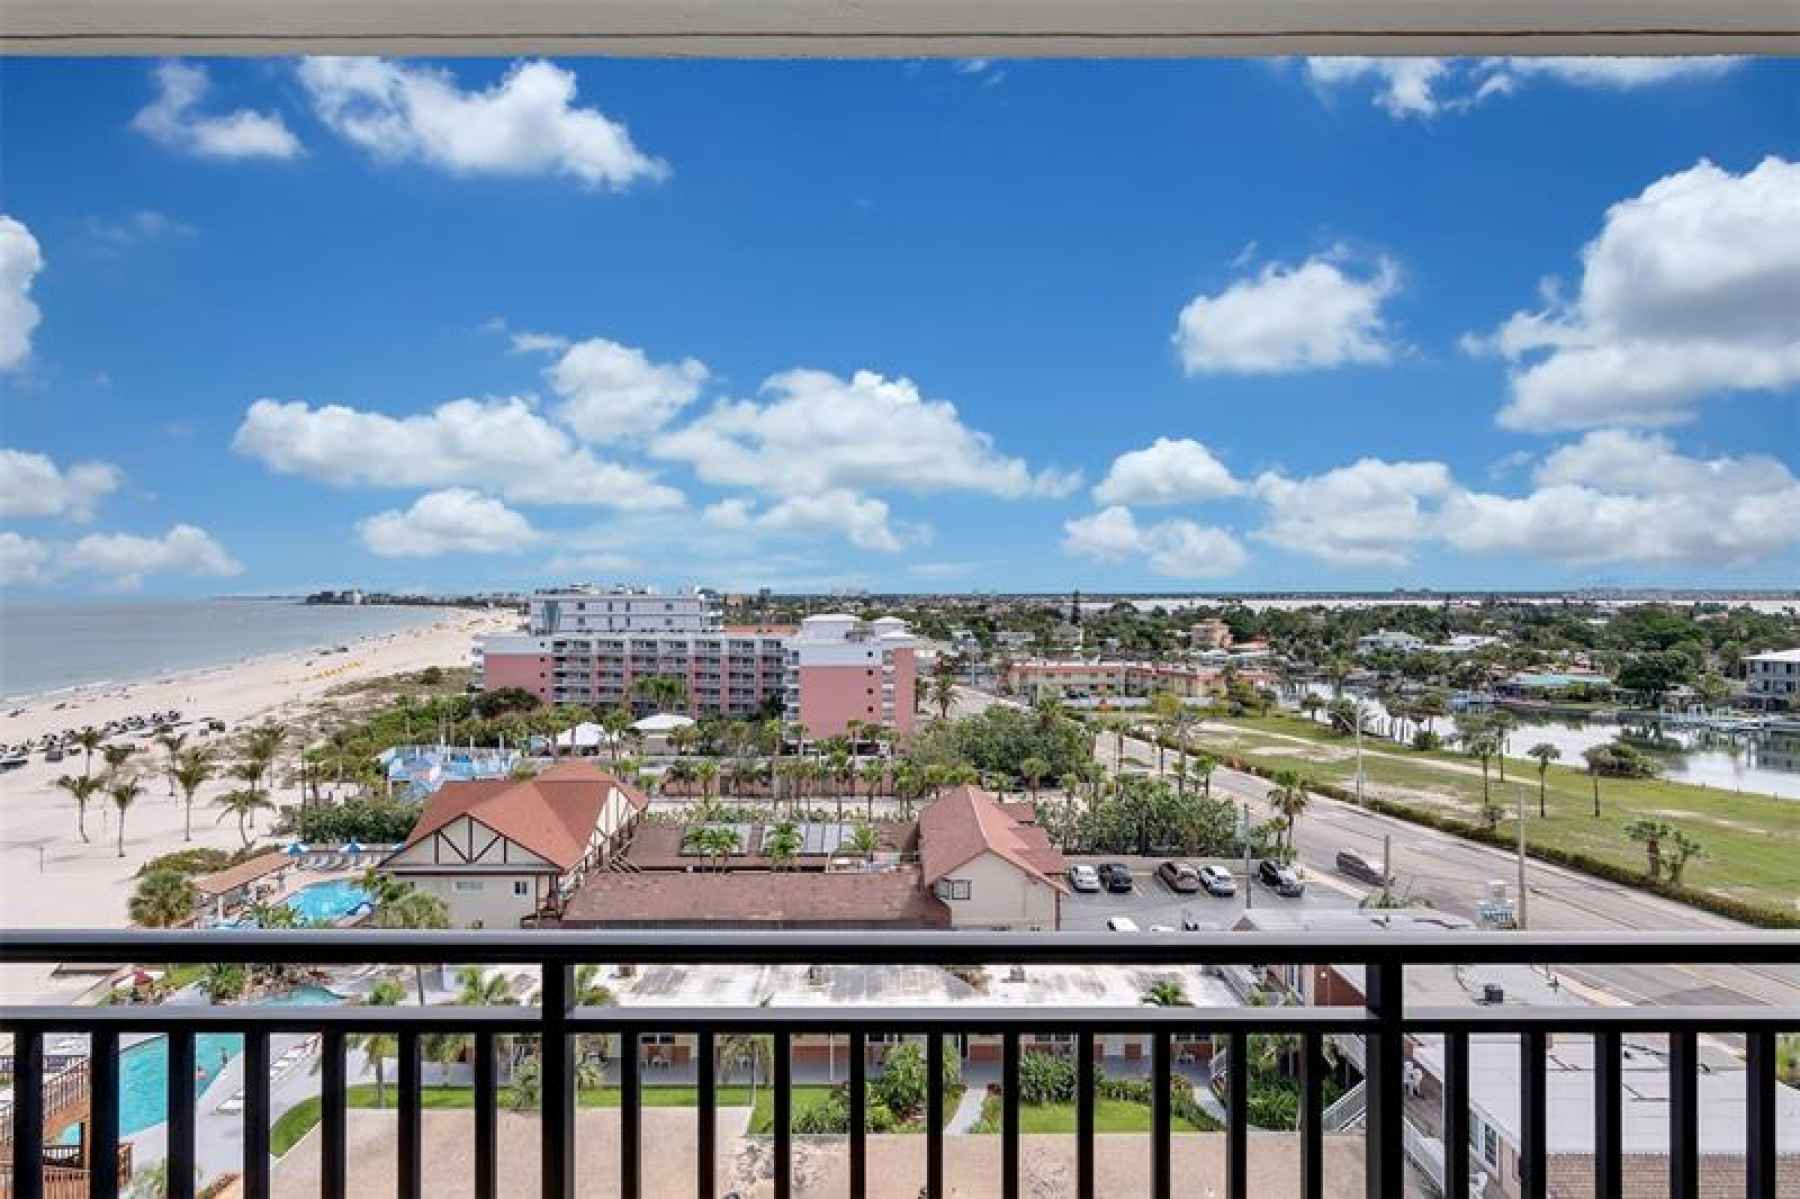 From the west bedroom balcony looking north up popular Gulf Blvd.